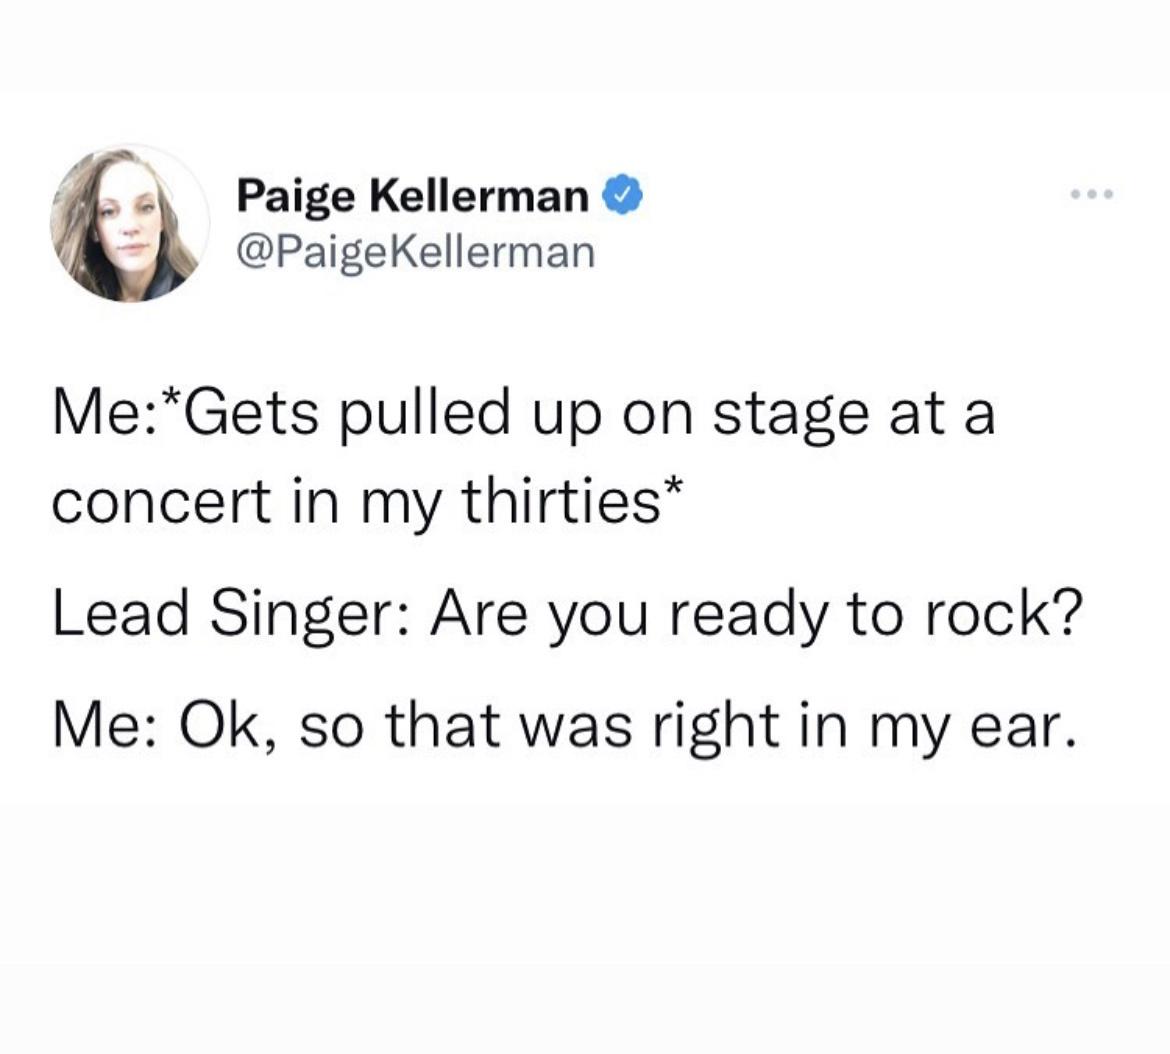 funny memes - dank memes - if you can t handle me at my depression - Paige Kellerman Kellerman MeGets pulled up on stage at a concert in my thirties Lead Singer Are you ready to rock? Me Ok, so that was right in my ear.